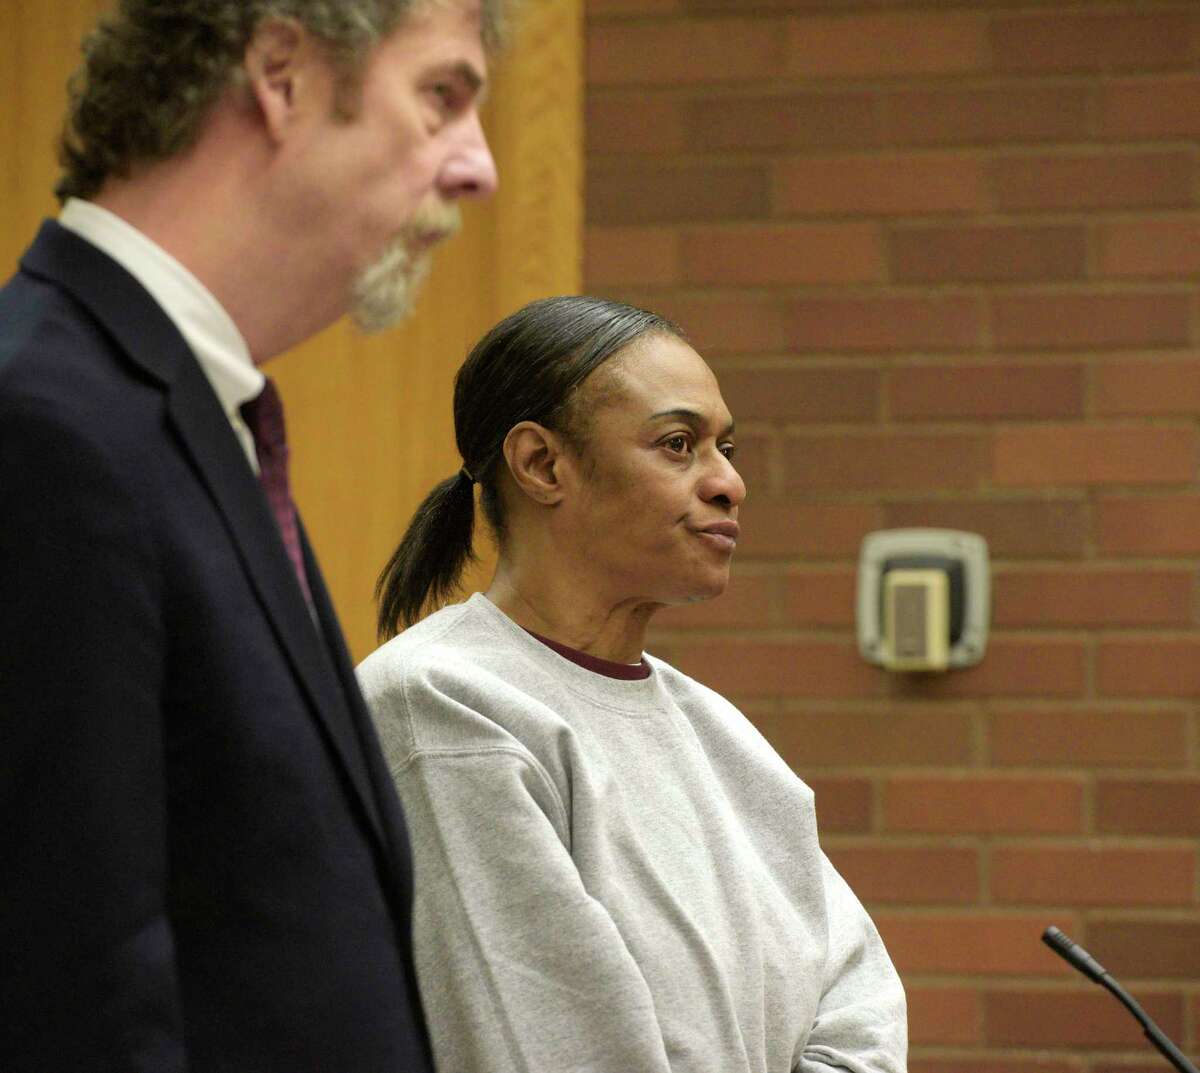 Cora Brandon, right, of Danbury, appears in Superior Court in Danbury with her attorney Jeffrey Hutcoe on Monday, January 23, 2023. Danbury, Conn.